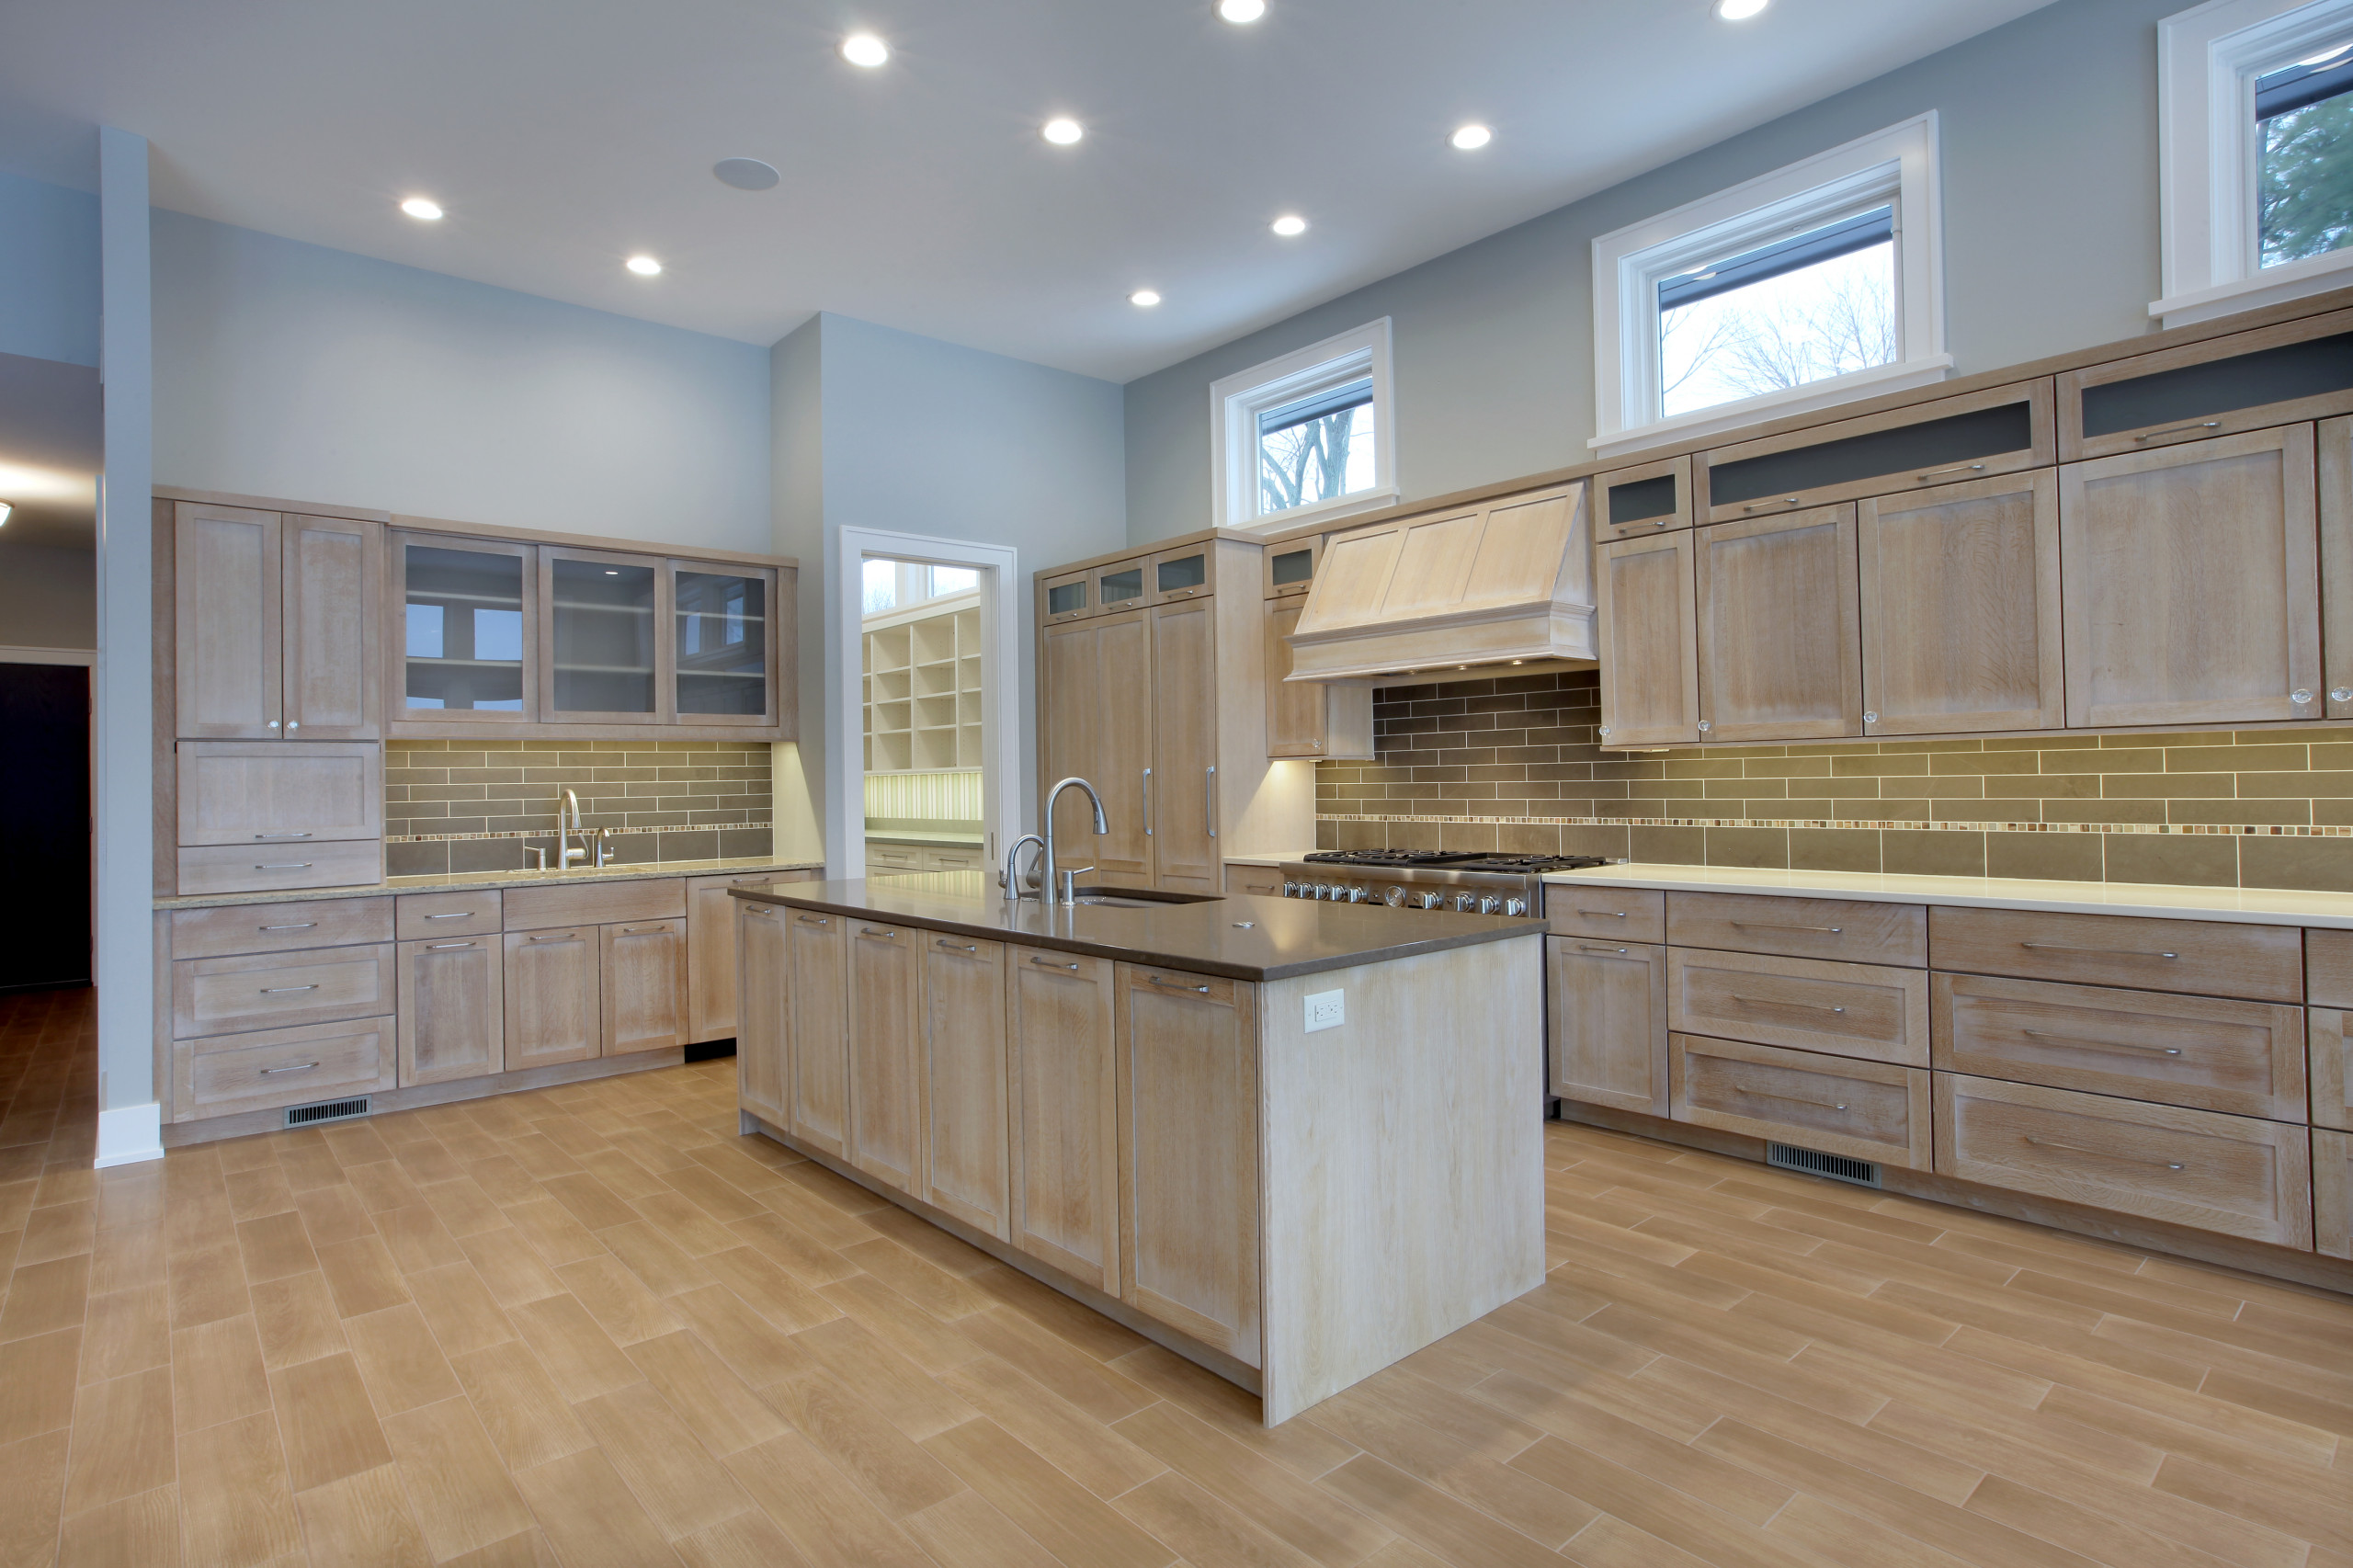 Refinish White Washed Oak Kitchen Cabinets – Things In The Kitchen